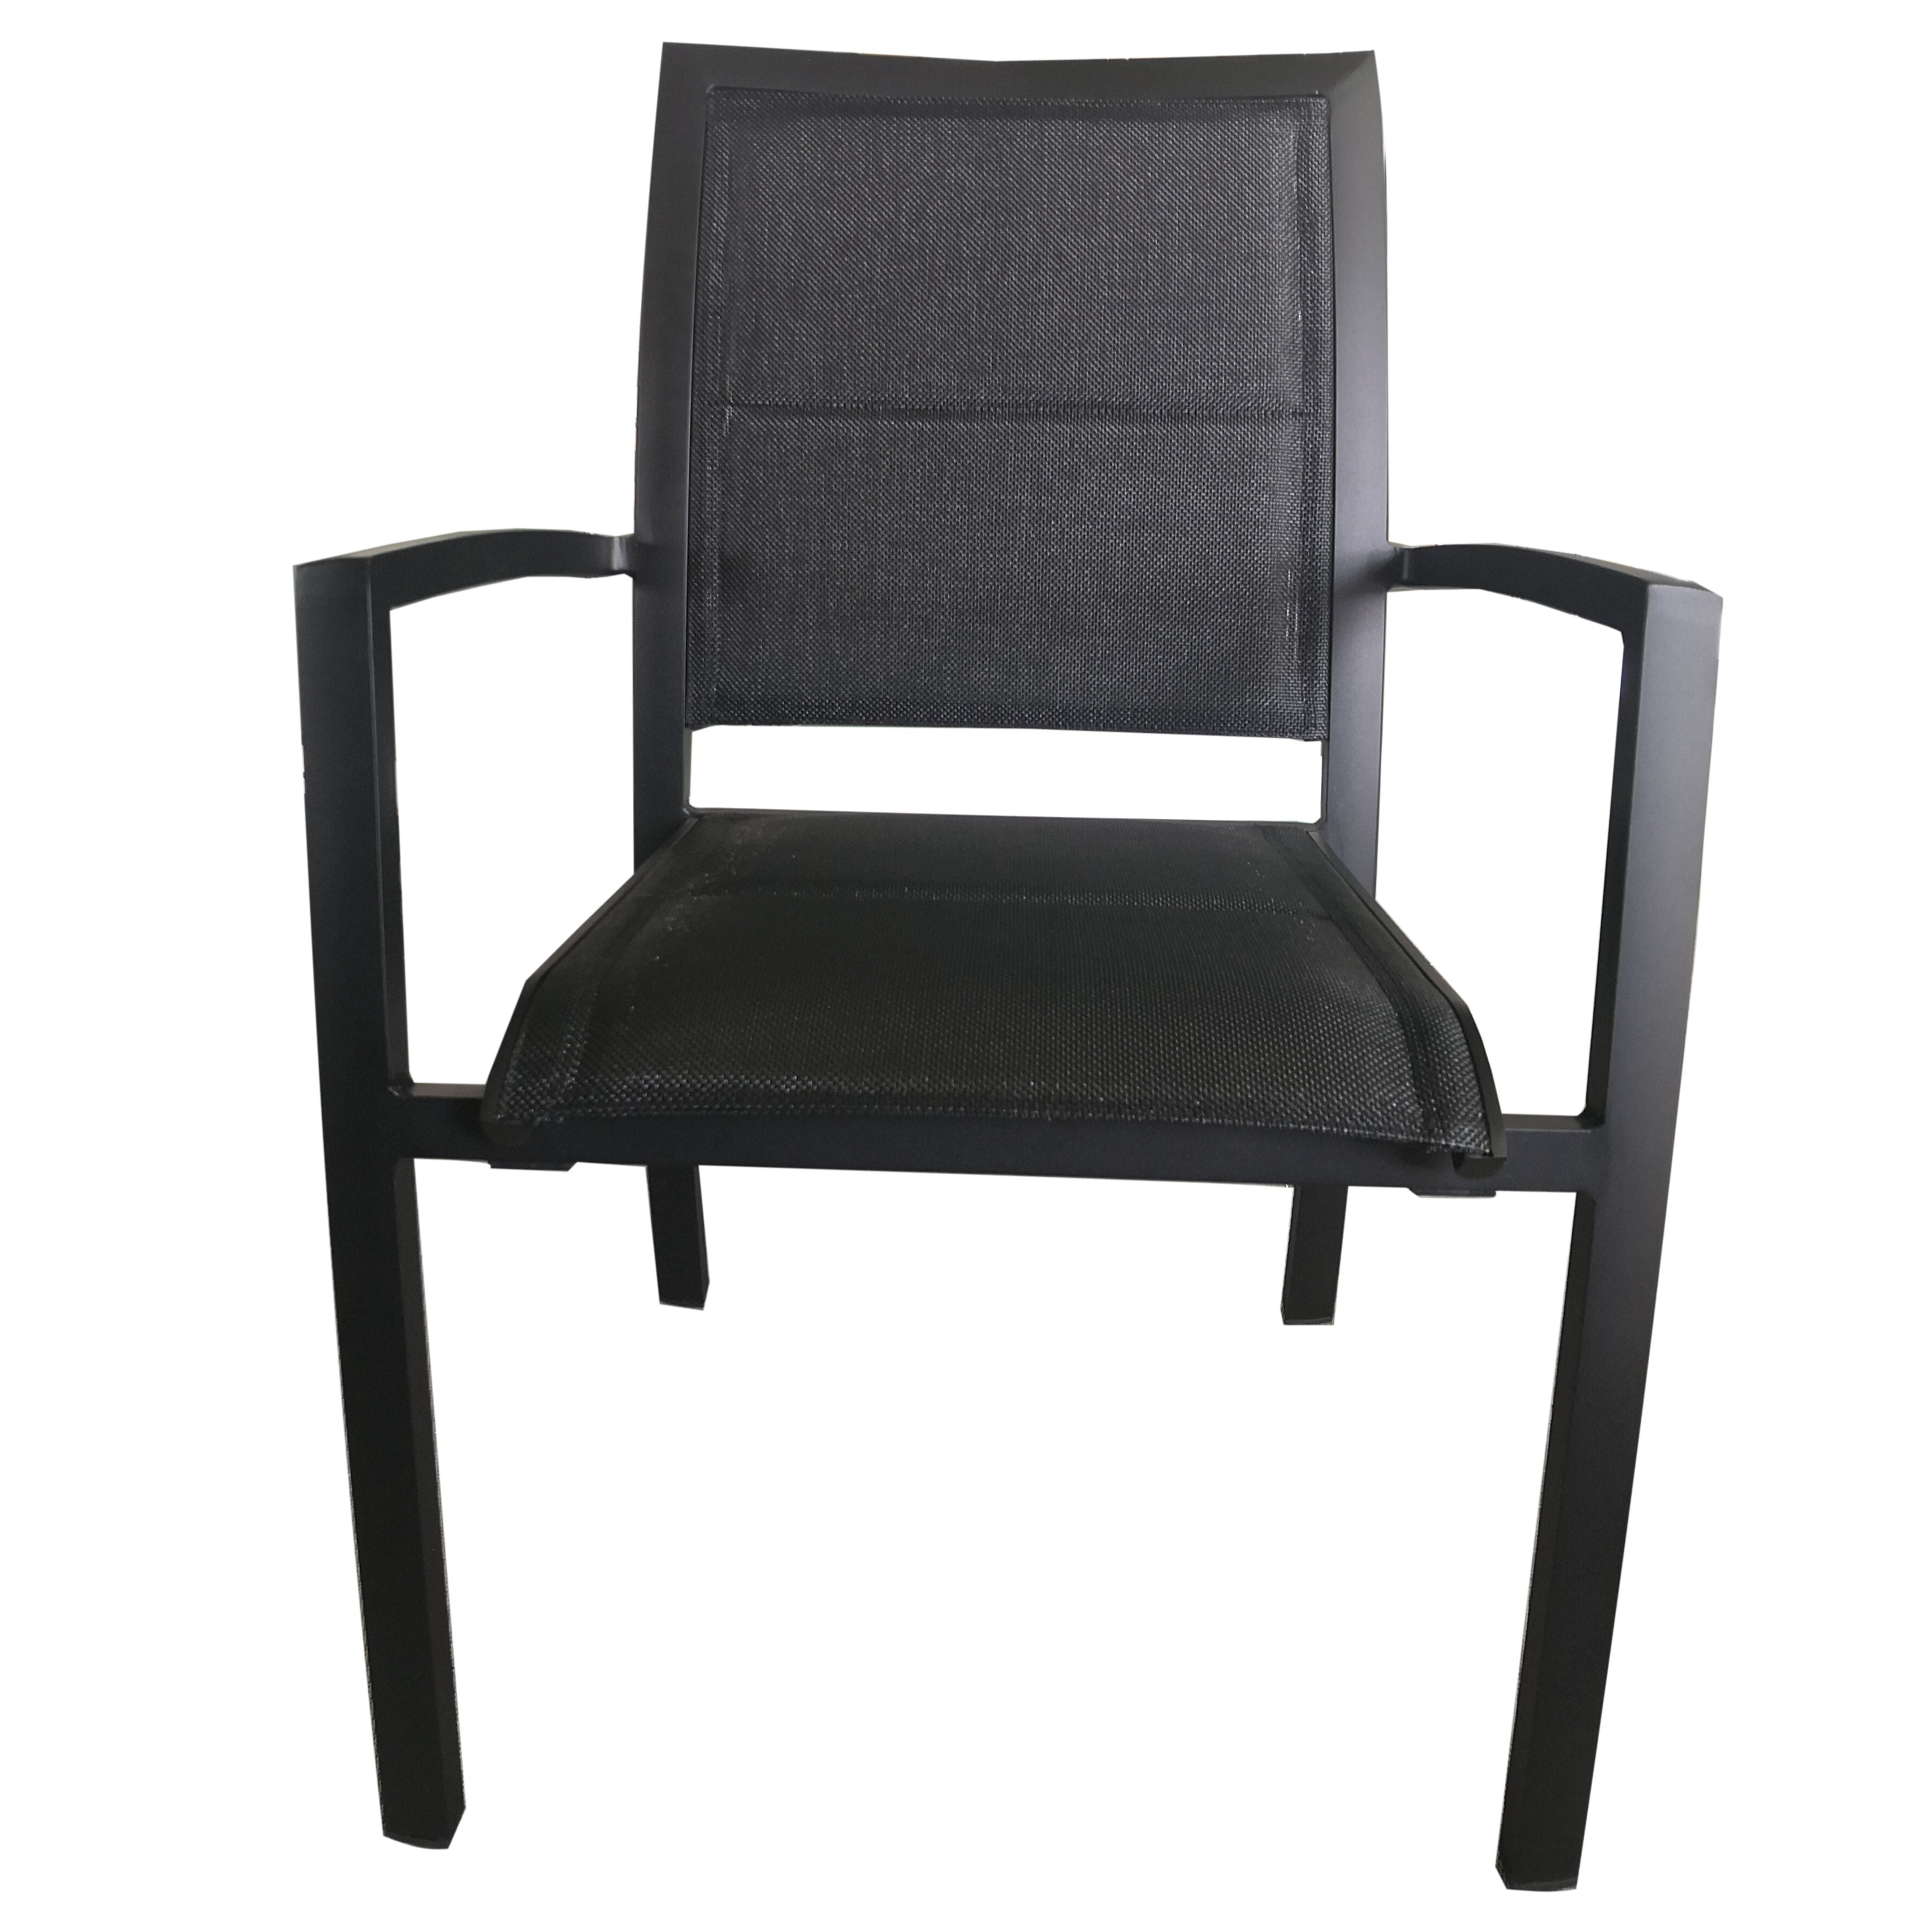 MOSS MOSS-T316NN - Akumal Collection, Black matte aluminum stackable chair with quick dry padded black textilene seat 24" x 31" x H 36"